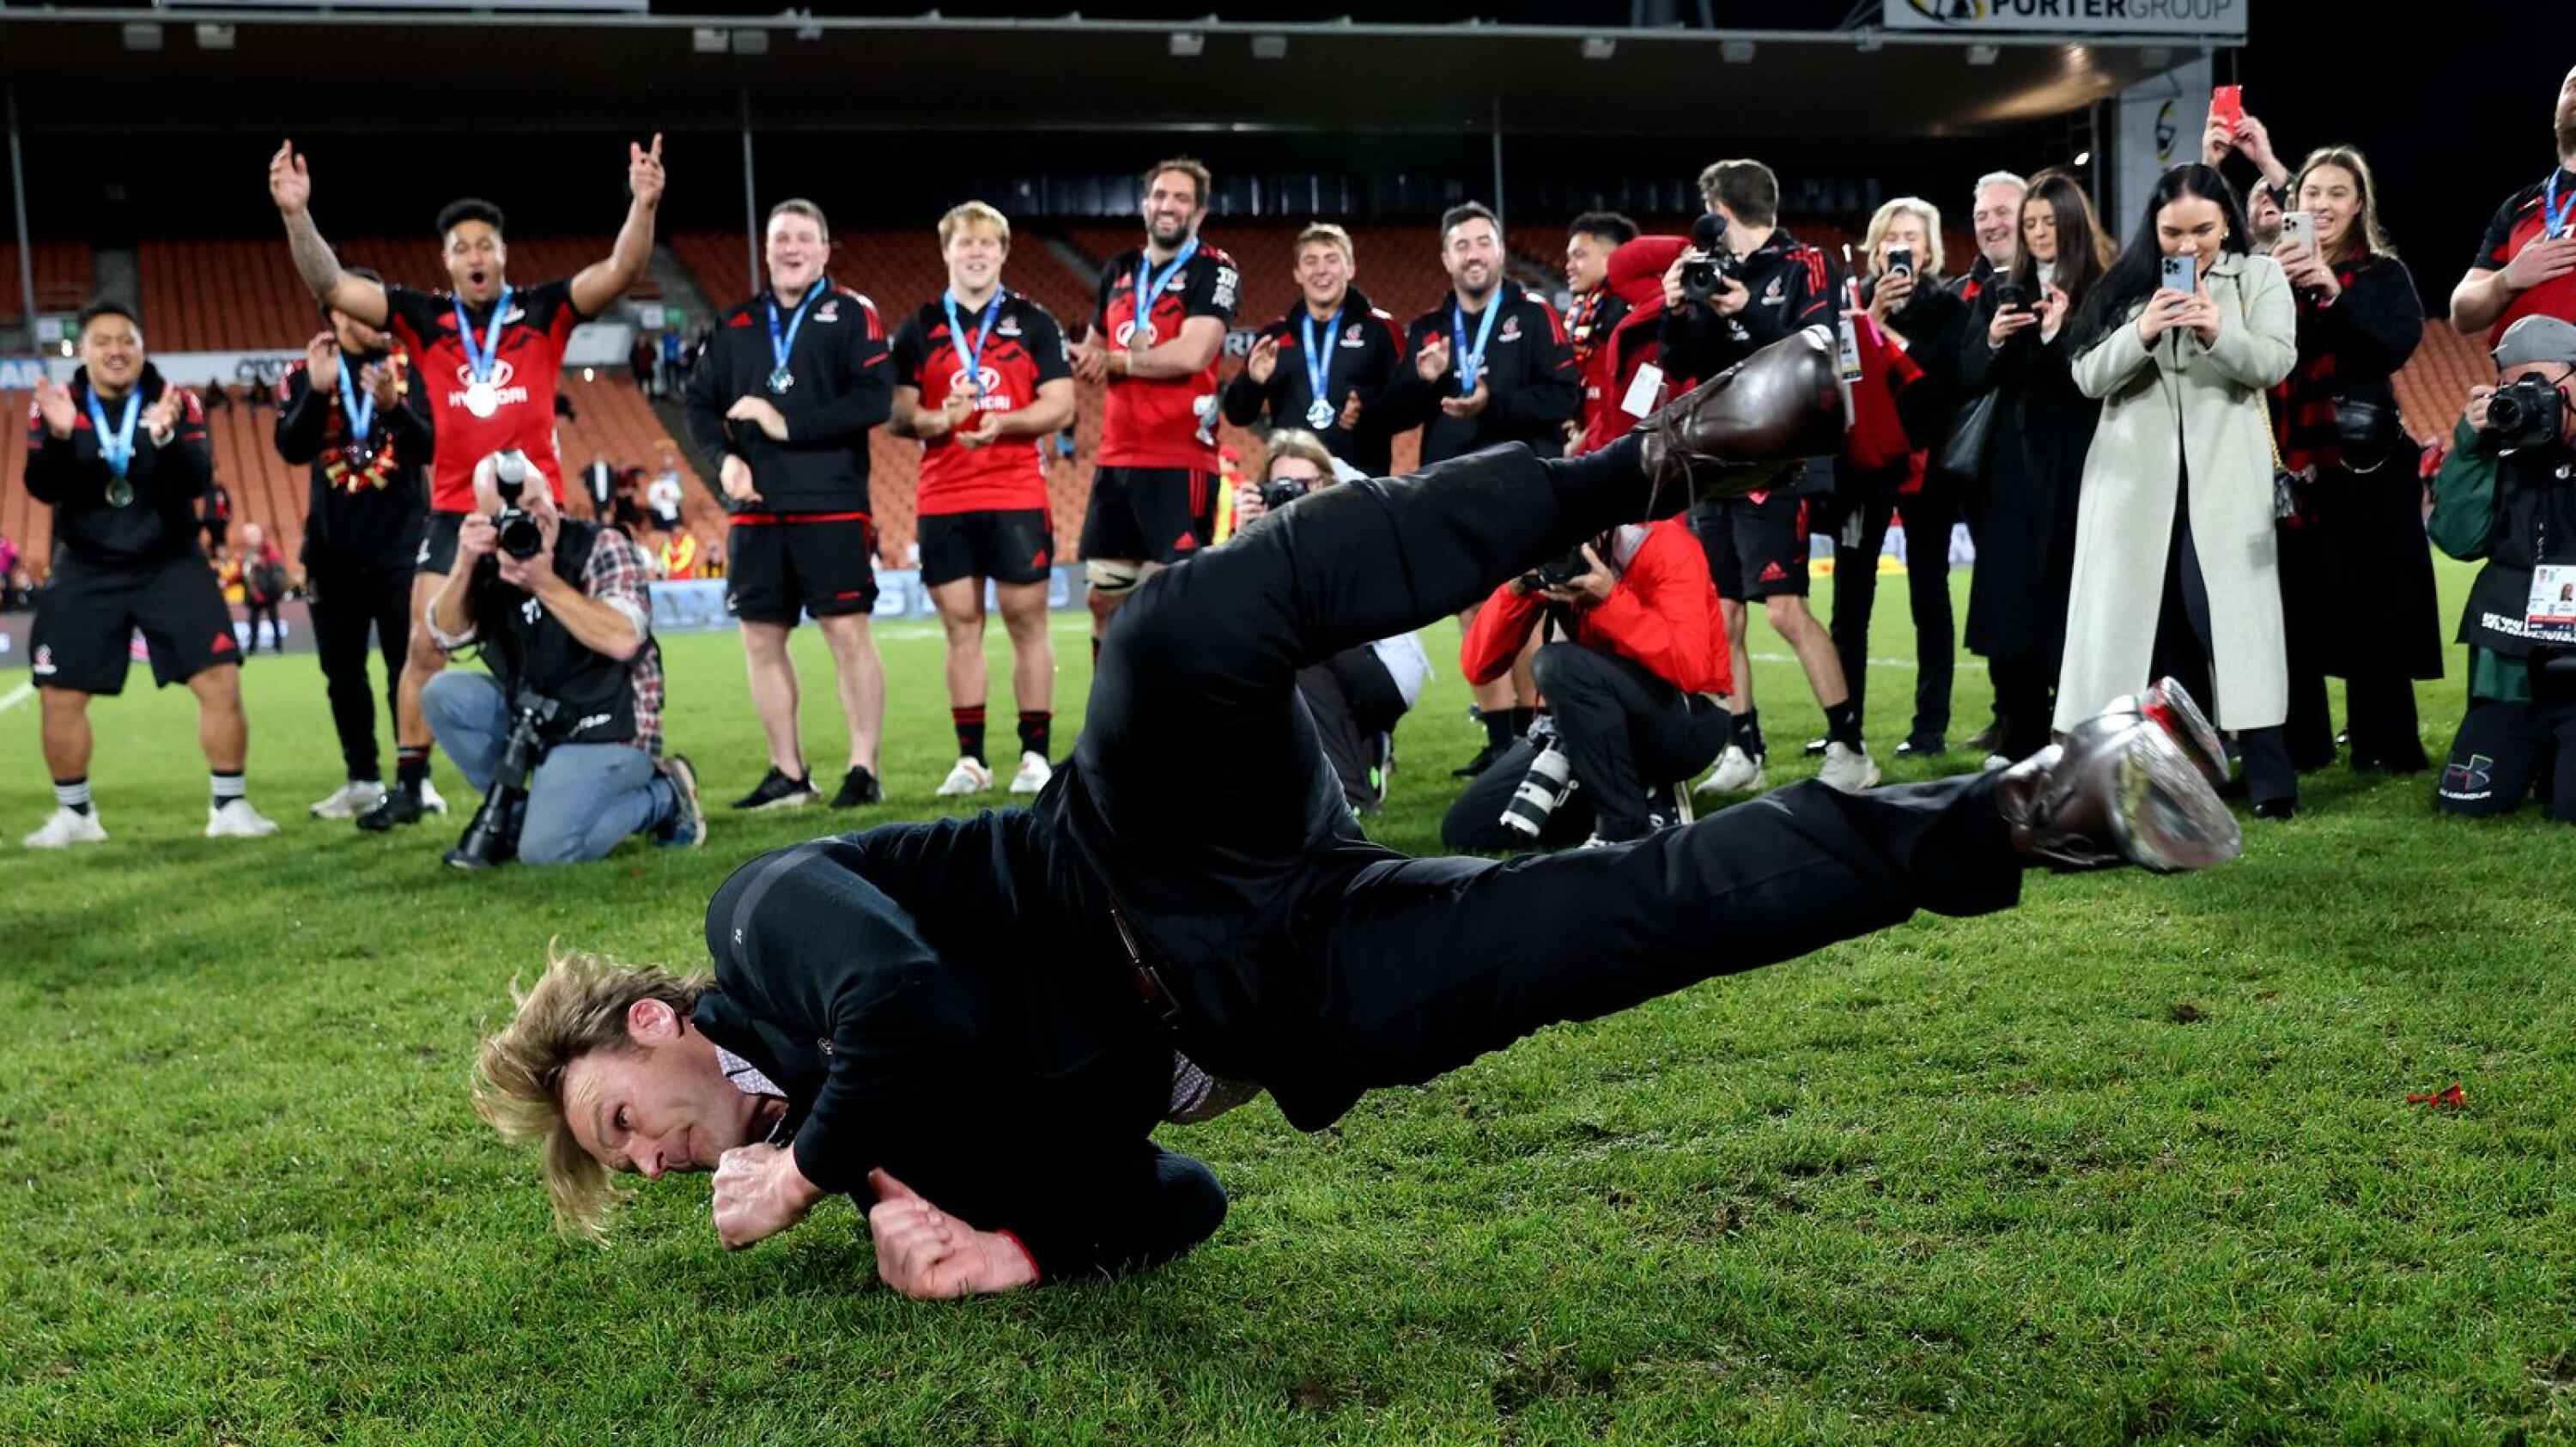 Crusaders head coach Scott Robertson celebrates with some break dance moves after winning the Super Rugby Pacific final against the Chiefs at FMG Stadium in Hamilton on Saturday